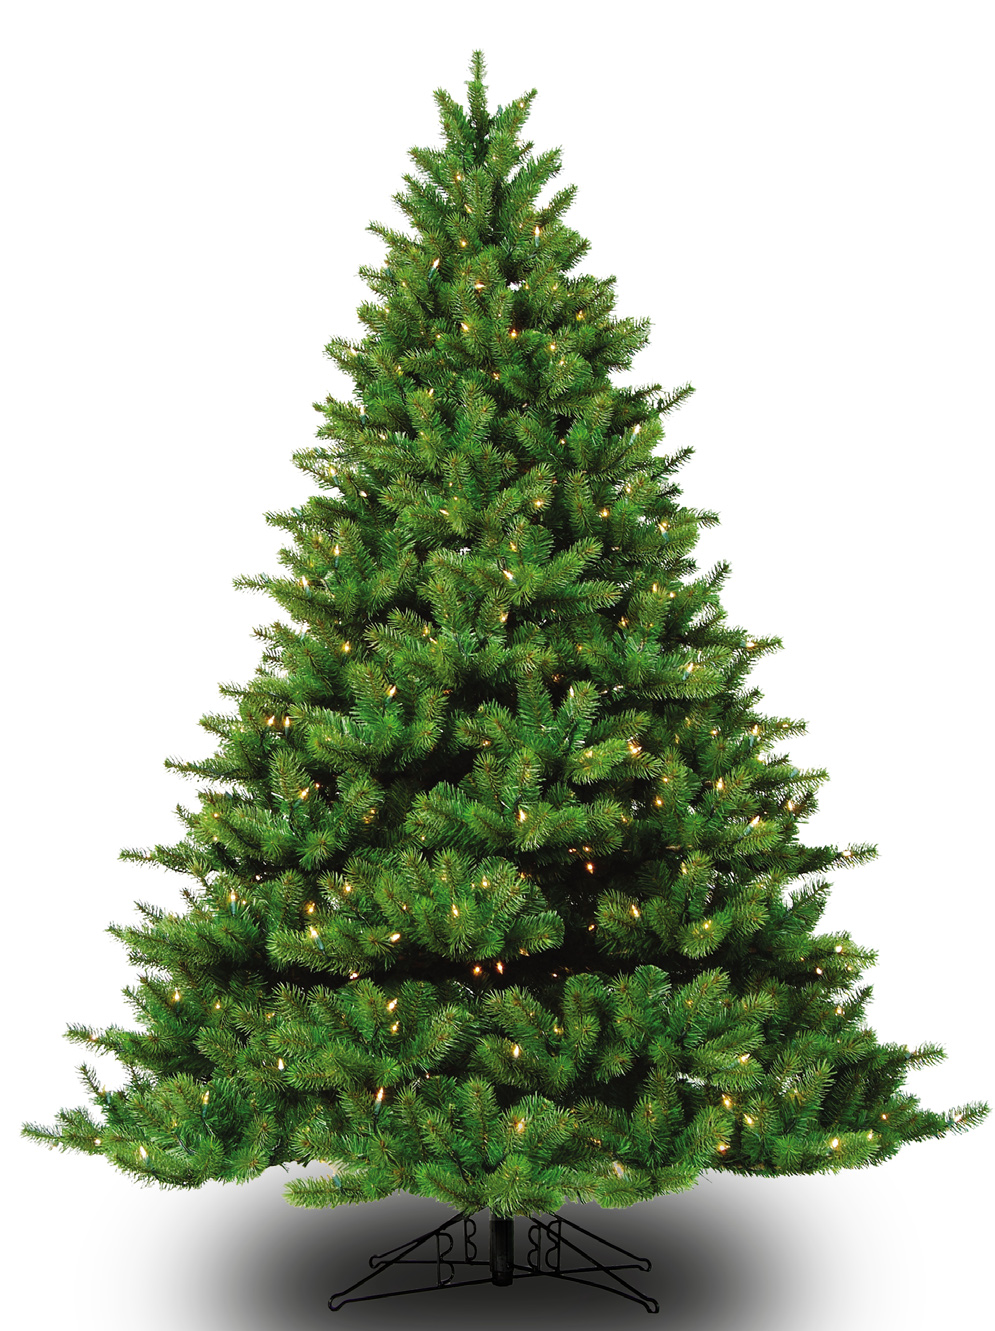 Appalachian Deluxe Christmas Tree - Warm White LED Twinkle Lights - One-Plug Power Supply Pole - 7.5ft Tall